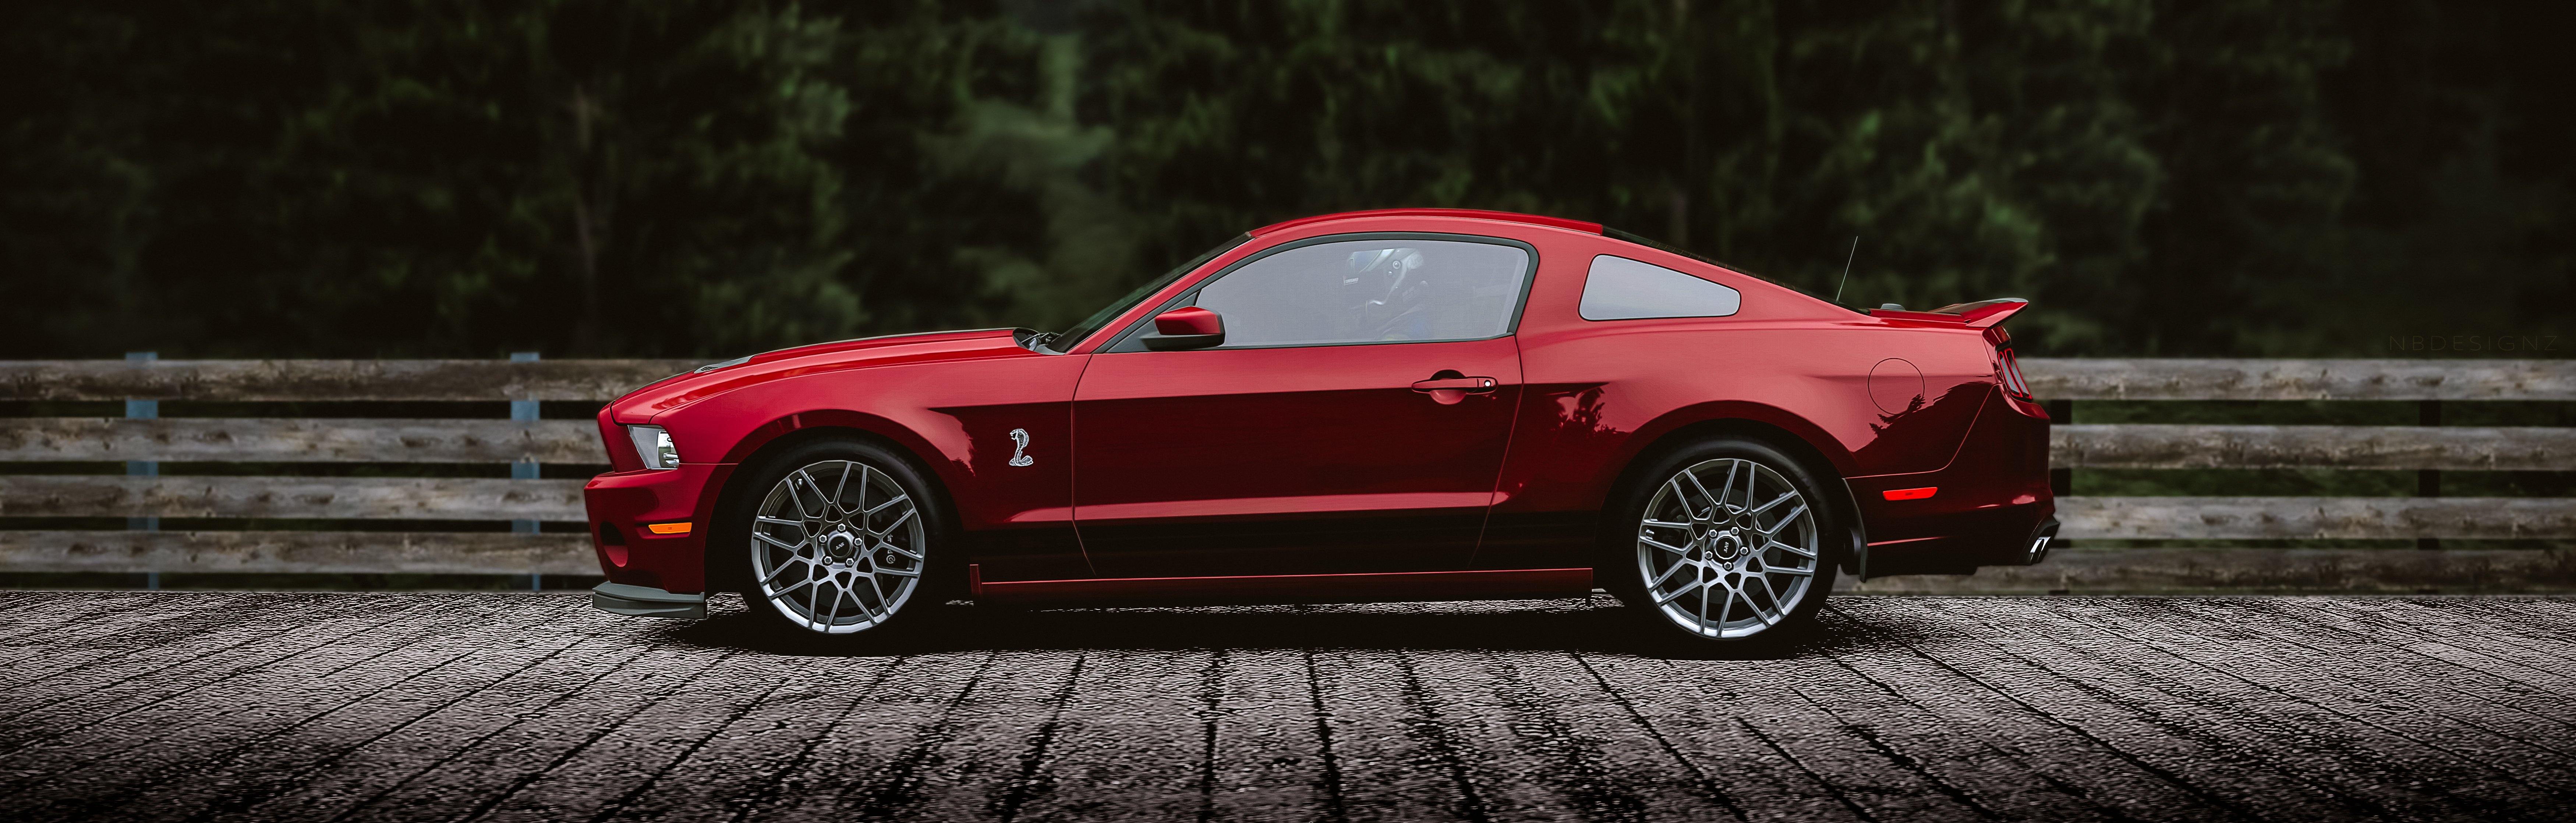 ford, Mustang, Shelby, Gt, 500,  , Gran, Turismo Wallpaper